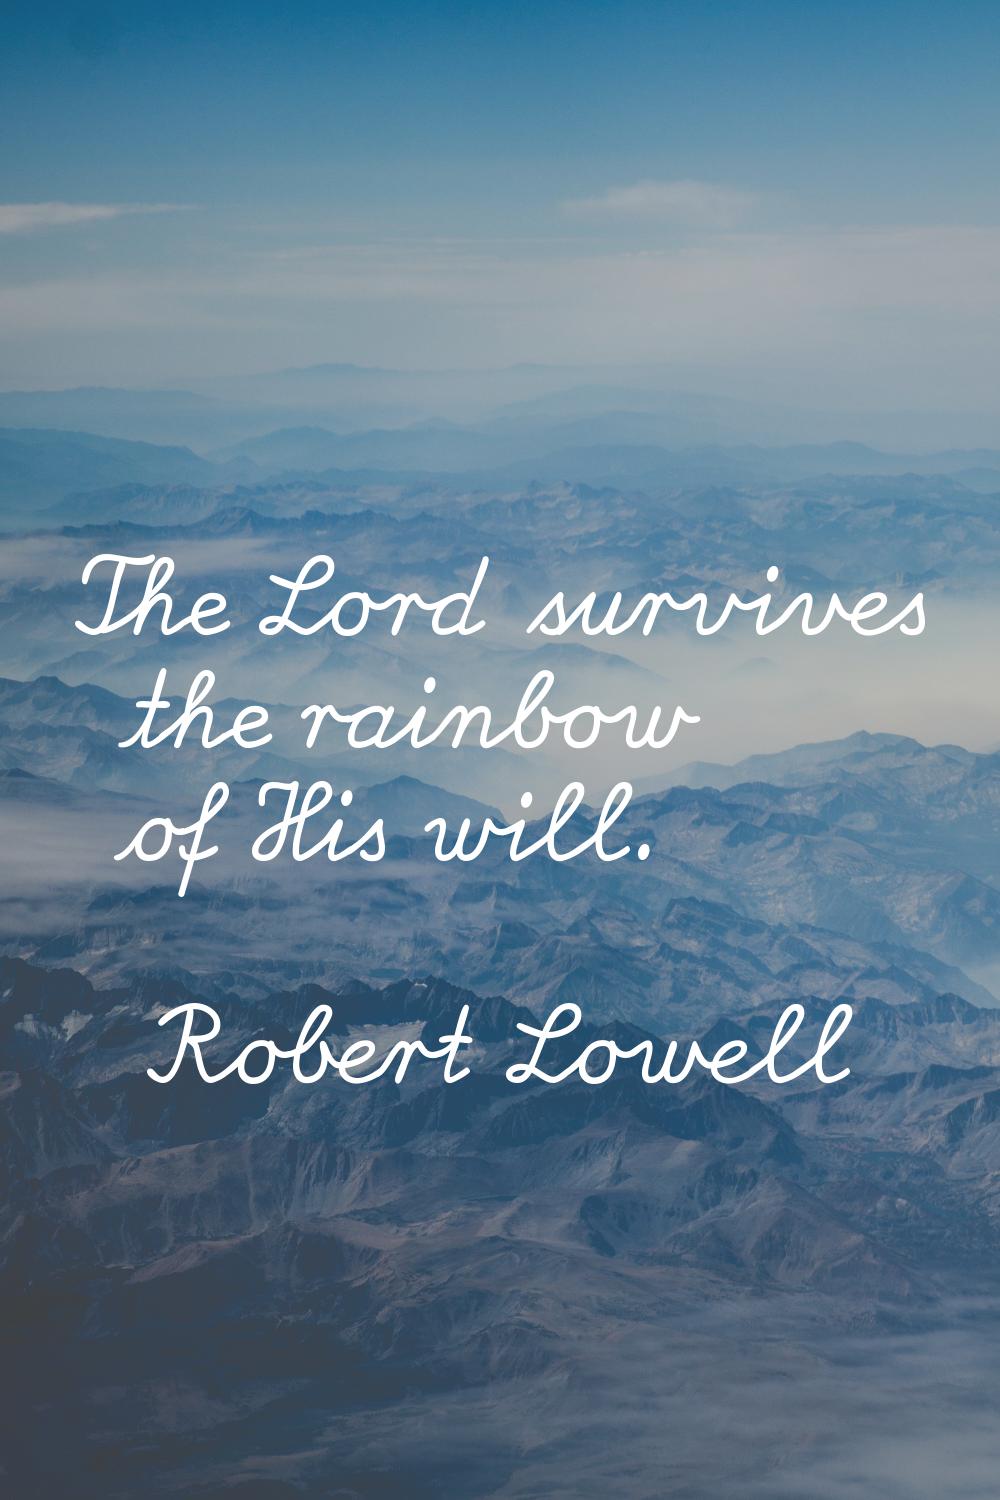 The Lord survives the rainbow of His will.